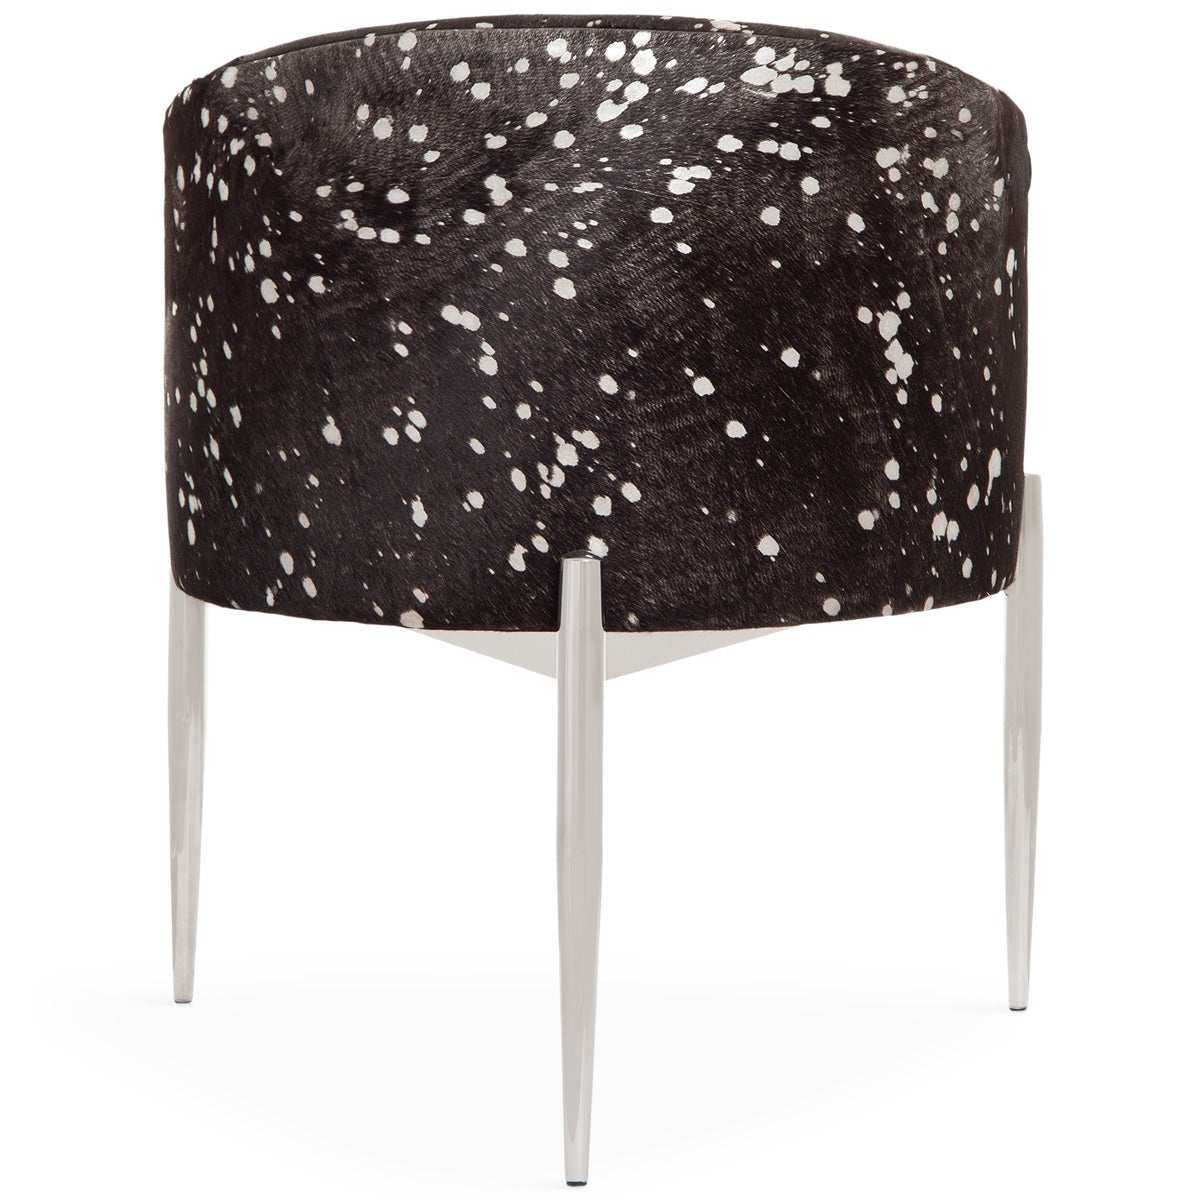 Art Deco Dining Chair in Black Silver Speckled Cowhide - ModShop1.com